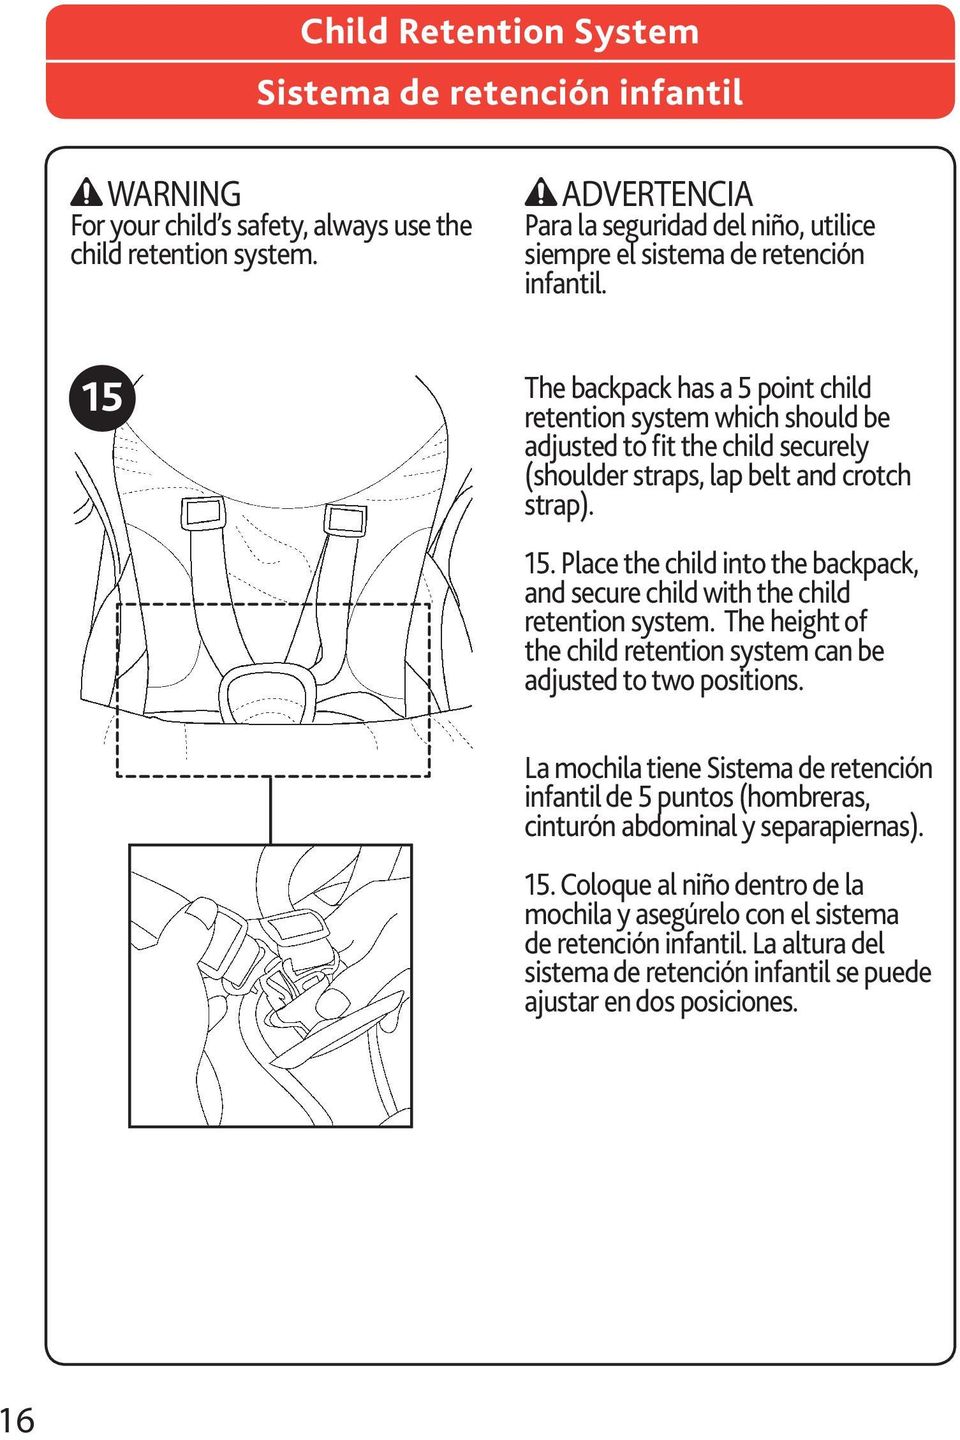 15 The backpack has a 5 point child retention system which should be adjusted to fit the child securely (shoulder straps, lap belt and crotch strap). 15.